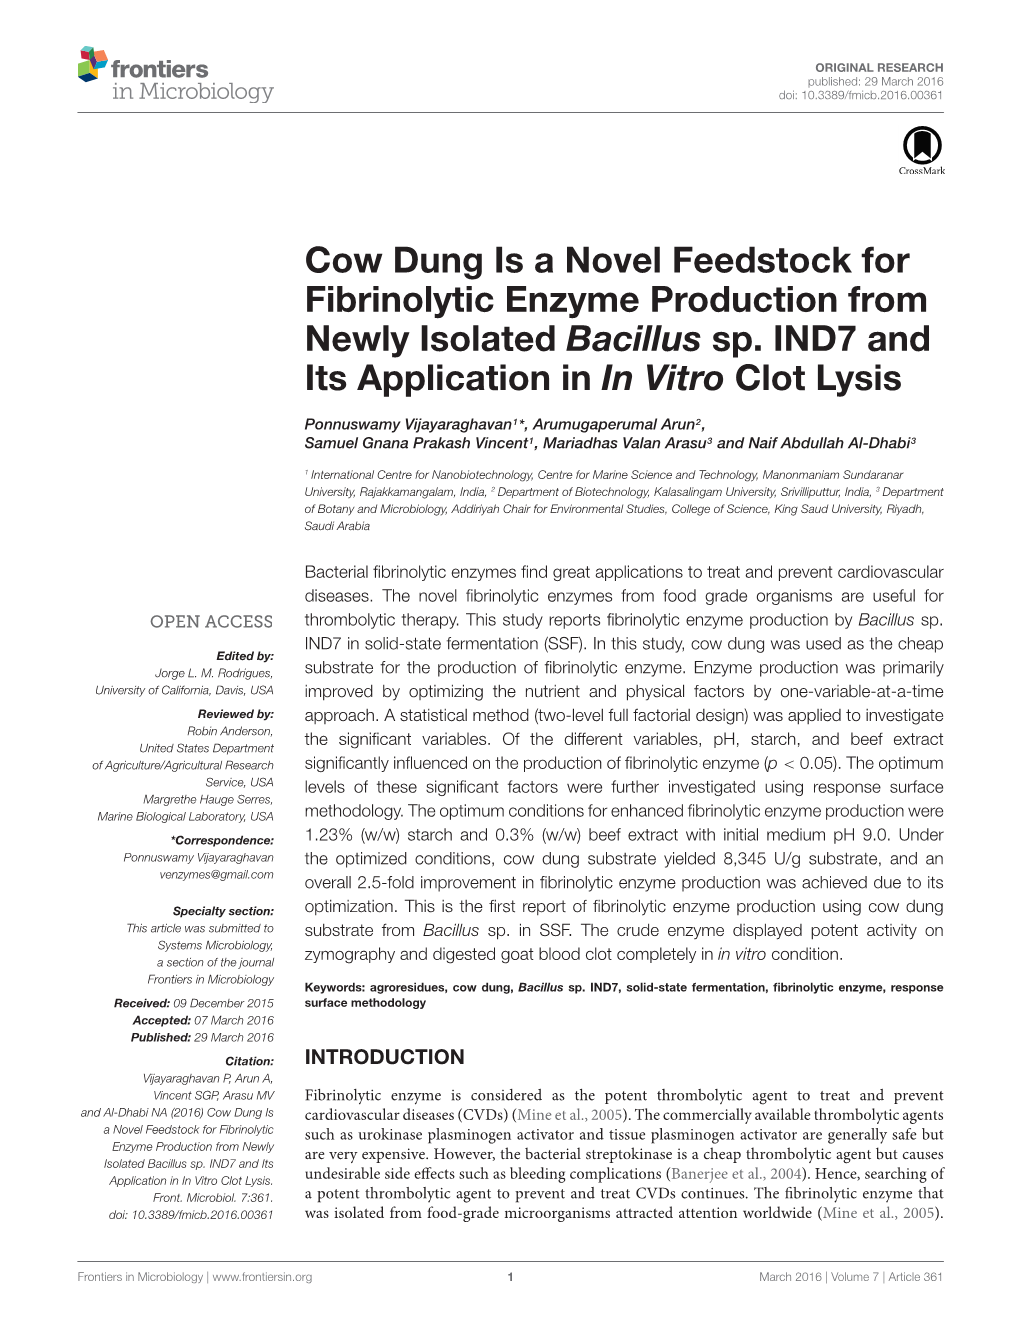 Cow Dung Is a Novel Feedstock for Fibrinolytic Enzyme Production from Newly Isolated Bacillus Sp